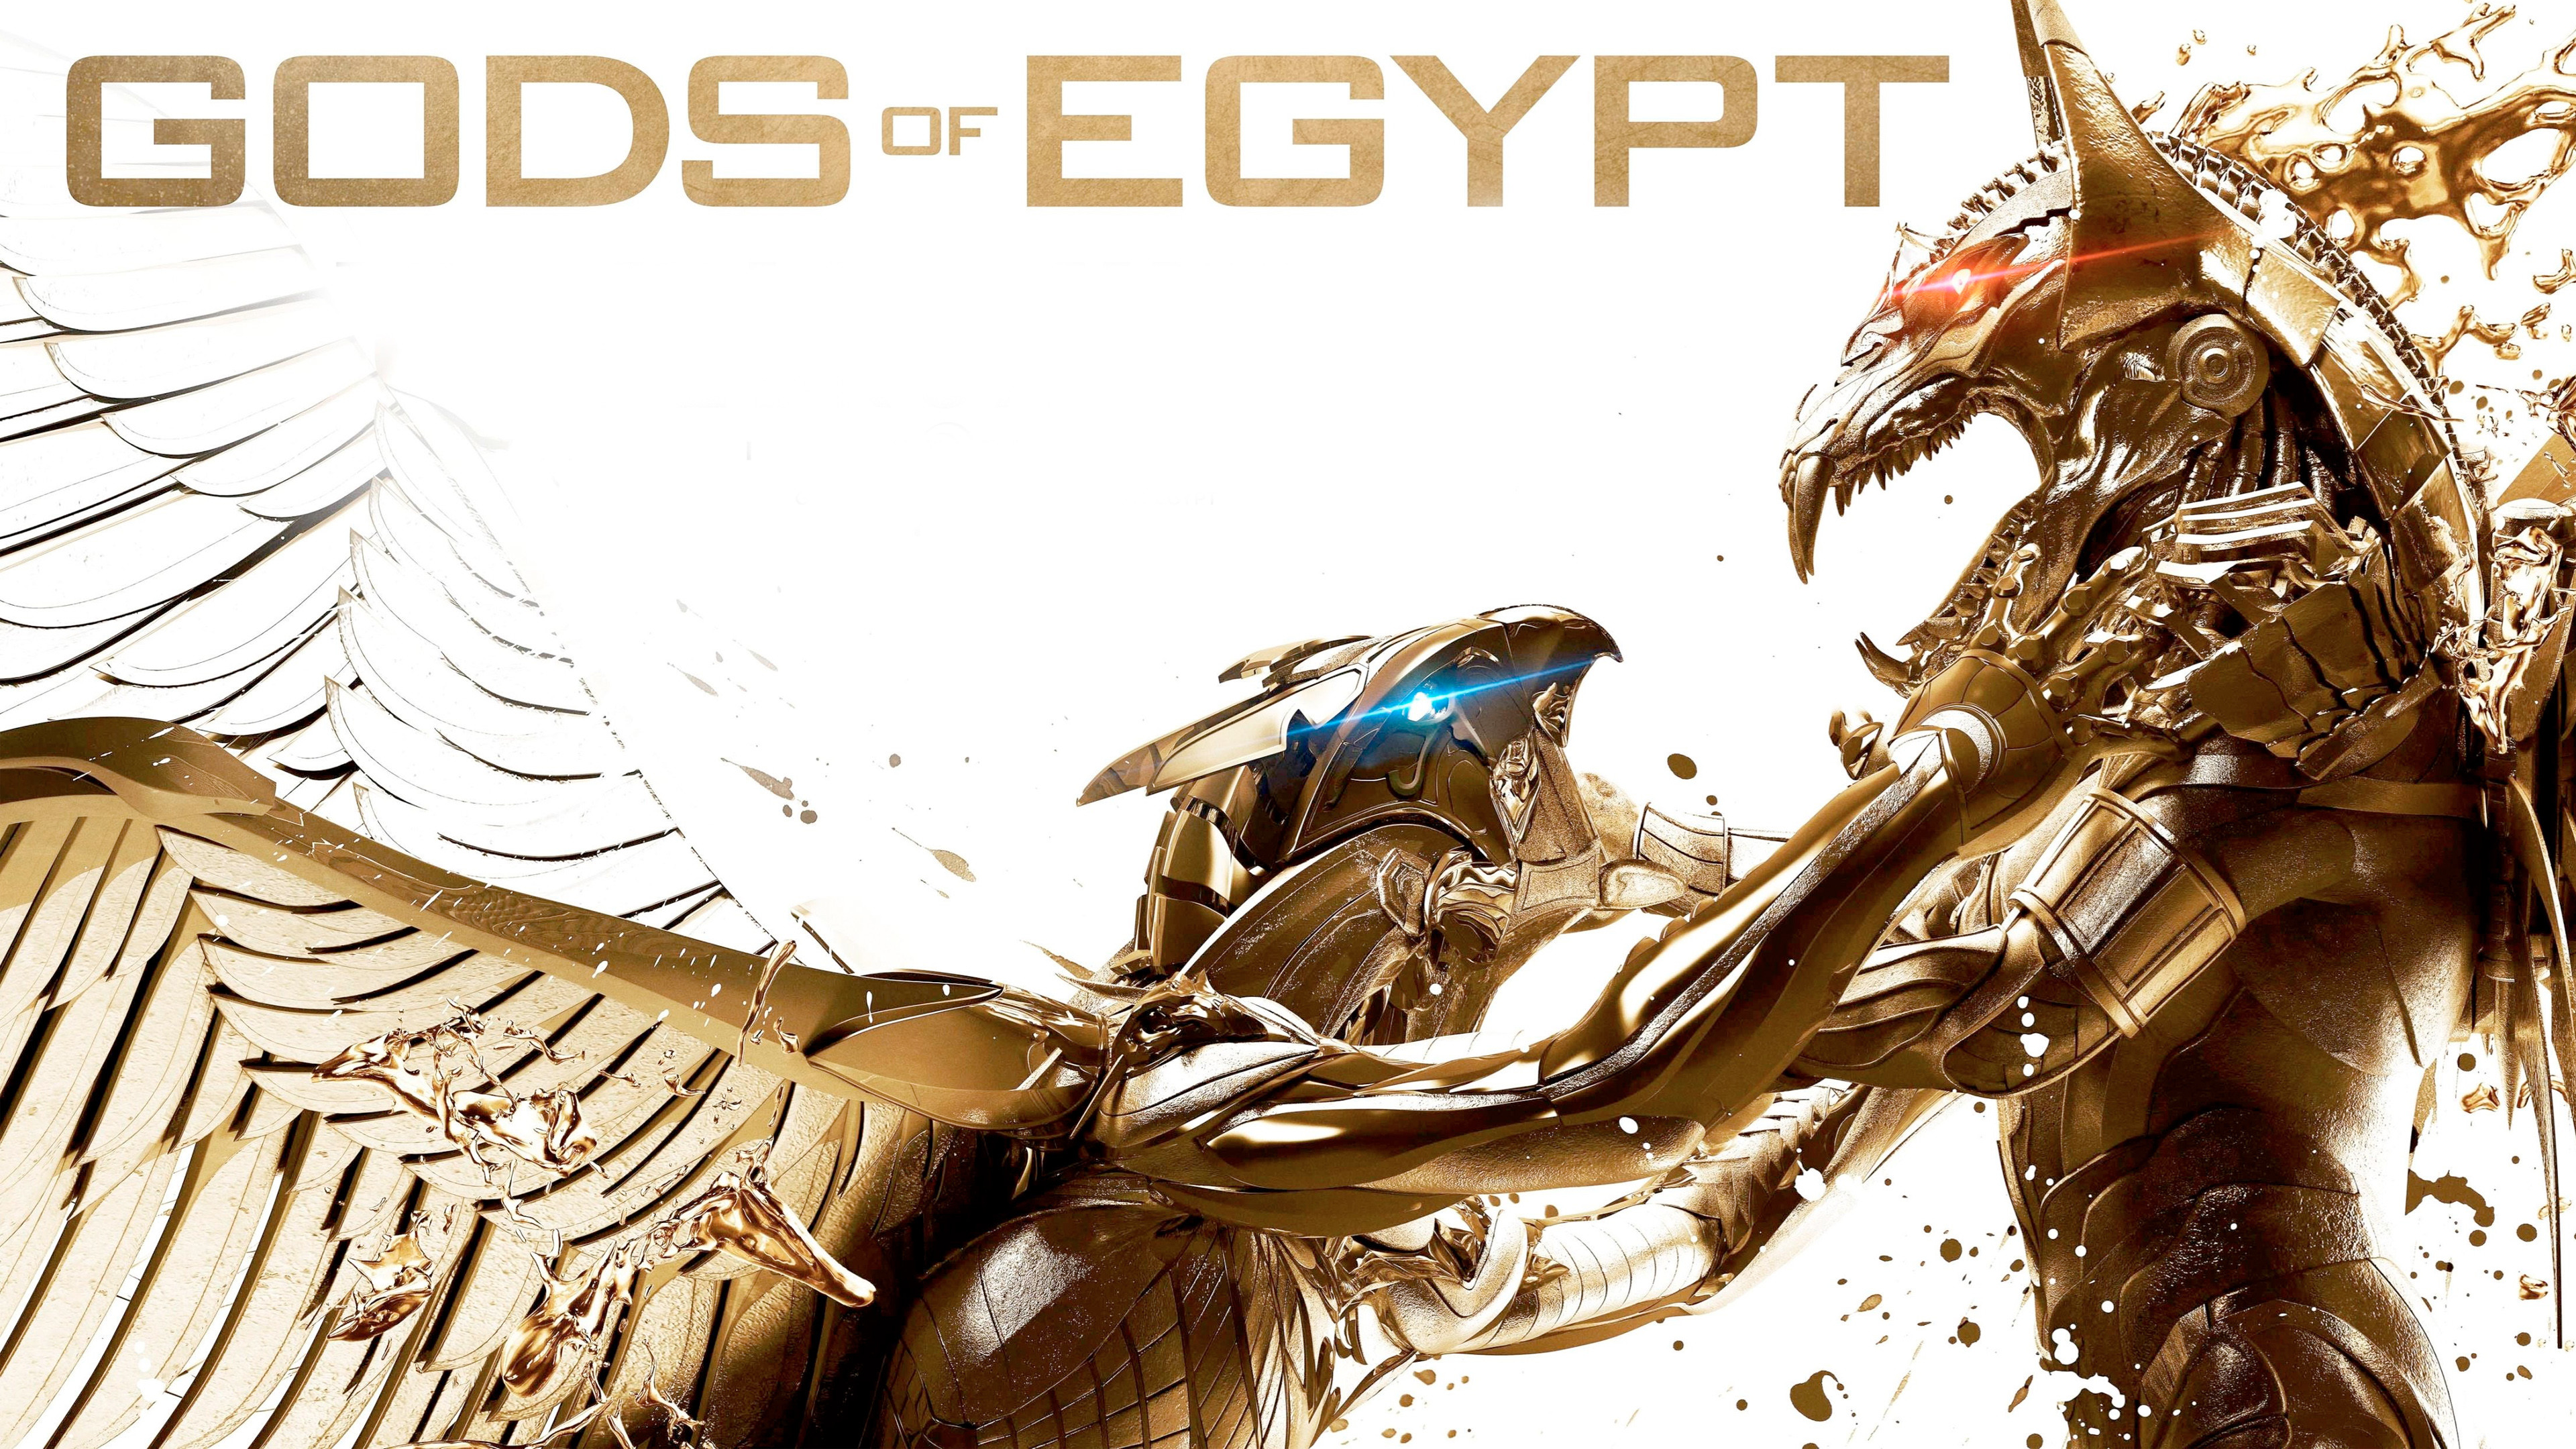 3840x2160 Gods of Egypt Movie Wallpapers | HD Wallpapers